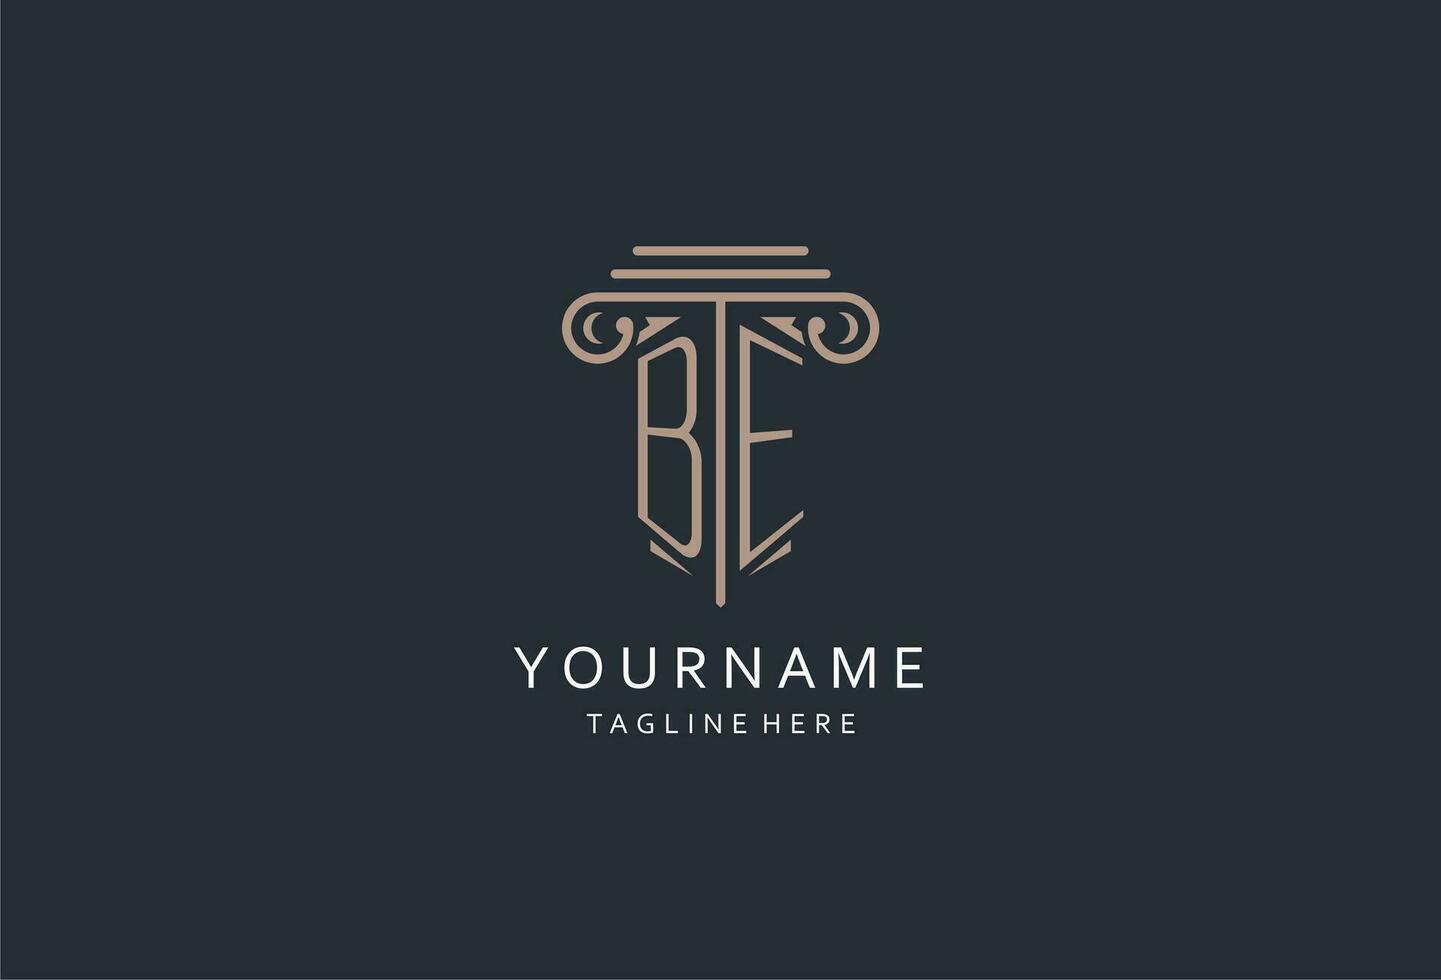 BE monogram logo with pillar shape icon, luxury and elegant design logo for law firm initial style logo vector